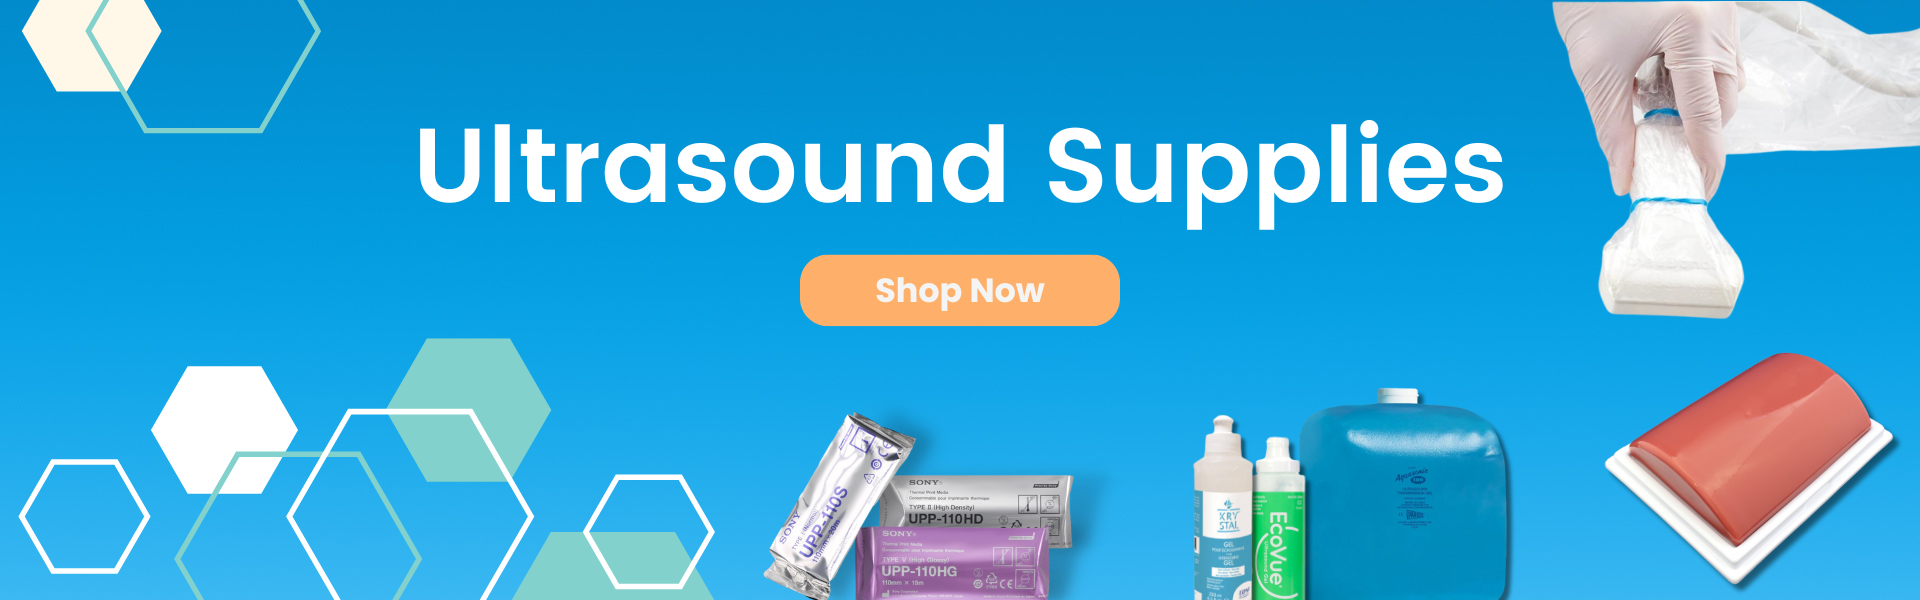 Discover our wide range of ultrasound supplies - EDM